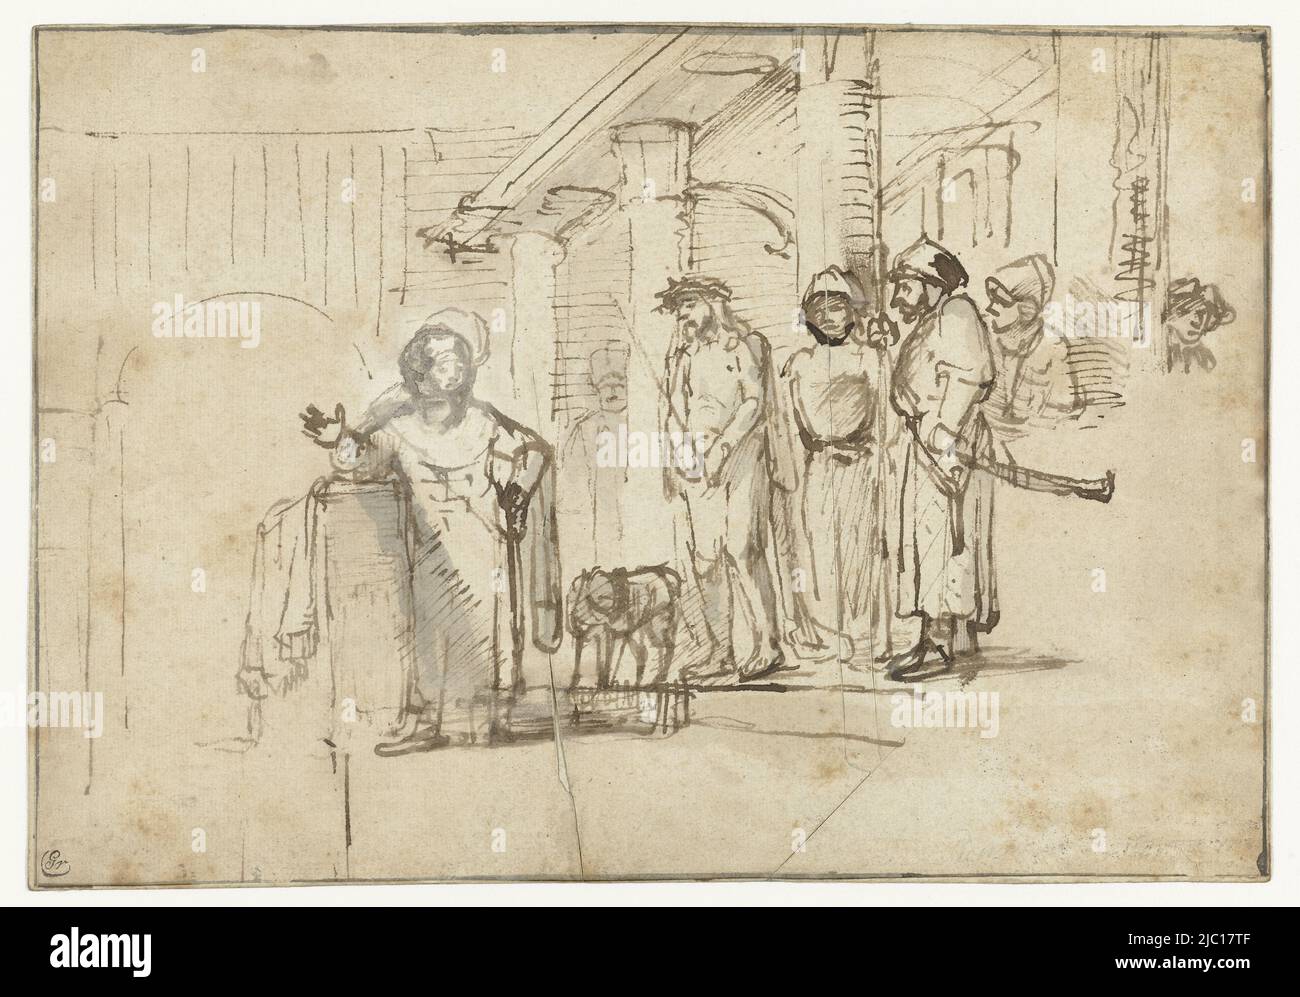 Christ Presented to the People by Pilate, draughtsman: Carel van Savoyen, (attributed to), draughtsman: Rembrandt van Rijn, (rejected attribution), Amsterdam, c. 1650, paper, pen, brush, h 173 mm × w 248 mm Stock Photo